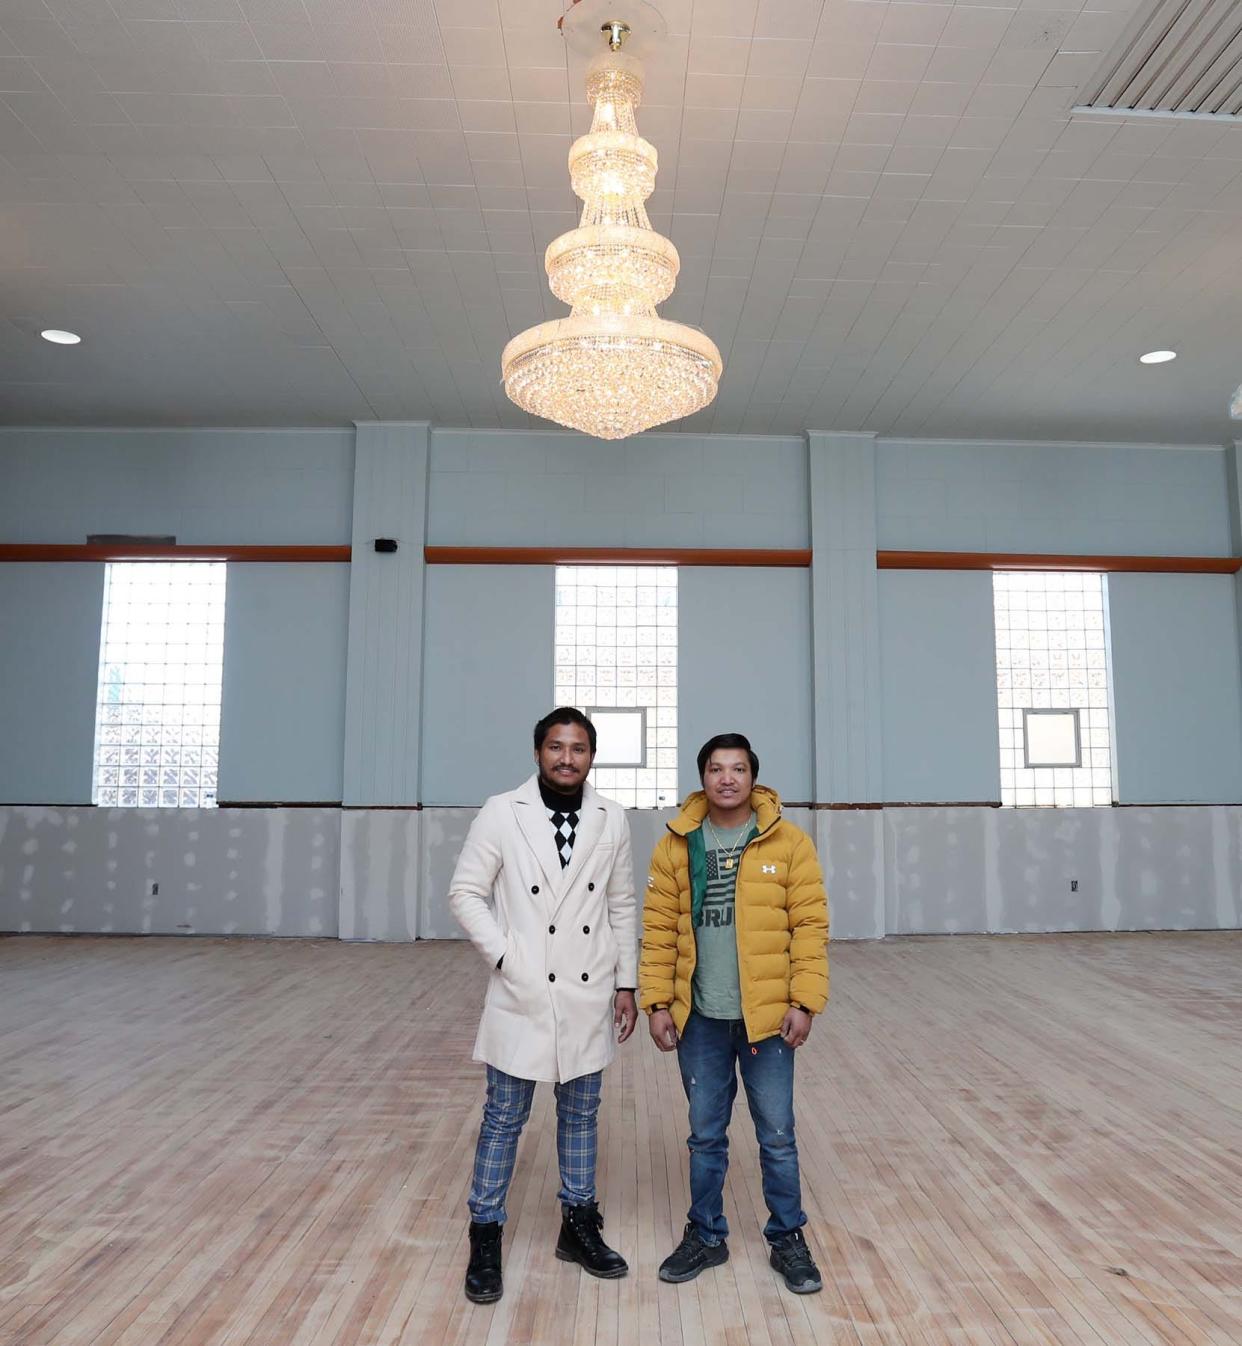 Som Baraily, left, and Janga Gajmer, owners of the Namaste Center formerly the Italian Center on East Tallmadge Avenue, stand under the new chandelier in the banquet hall they are renovating on Monday in Akron. 